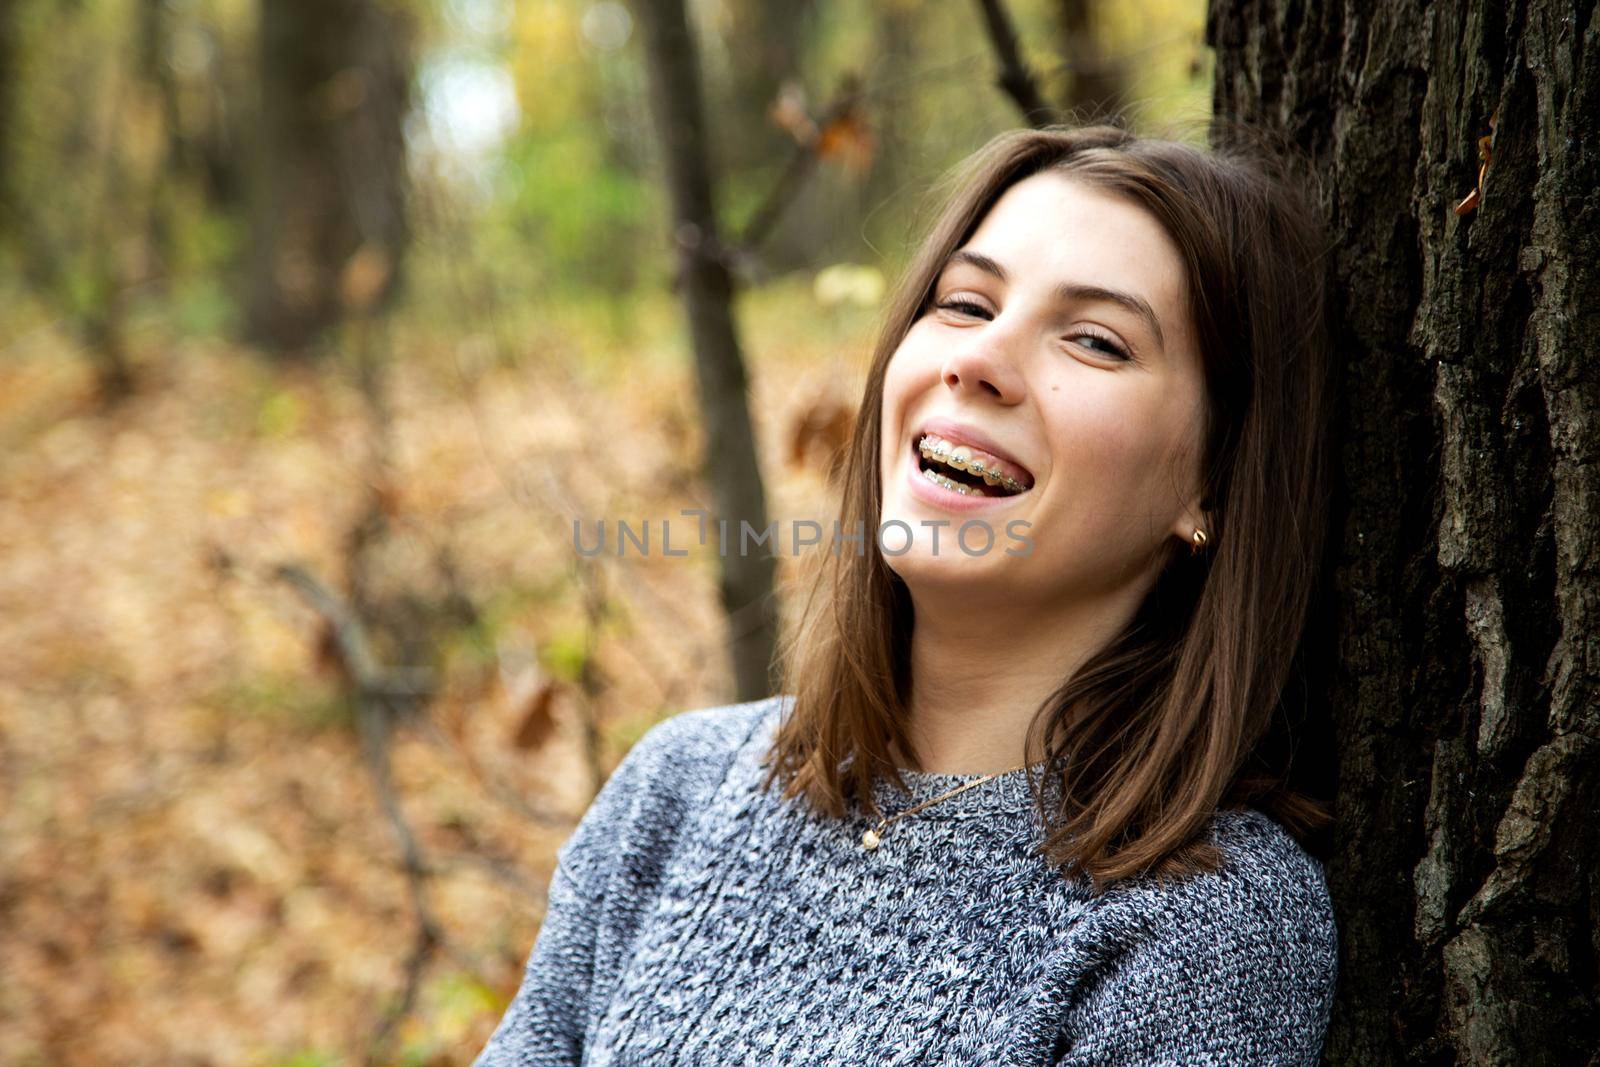 Young beautiful girl with braces on her teeth in a gray sweater sits in the autumn forest near a large tree and smiles sweetly.